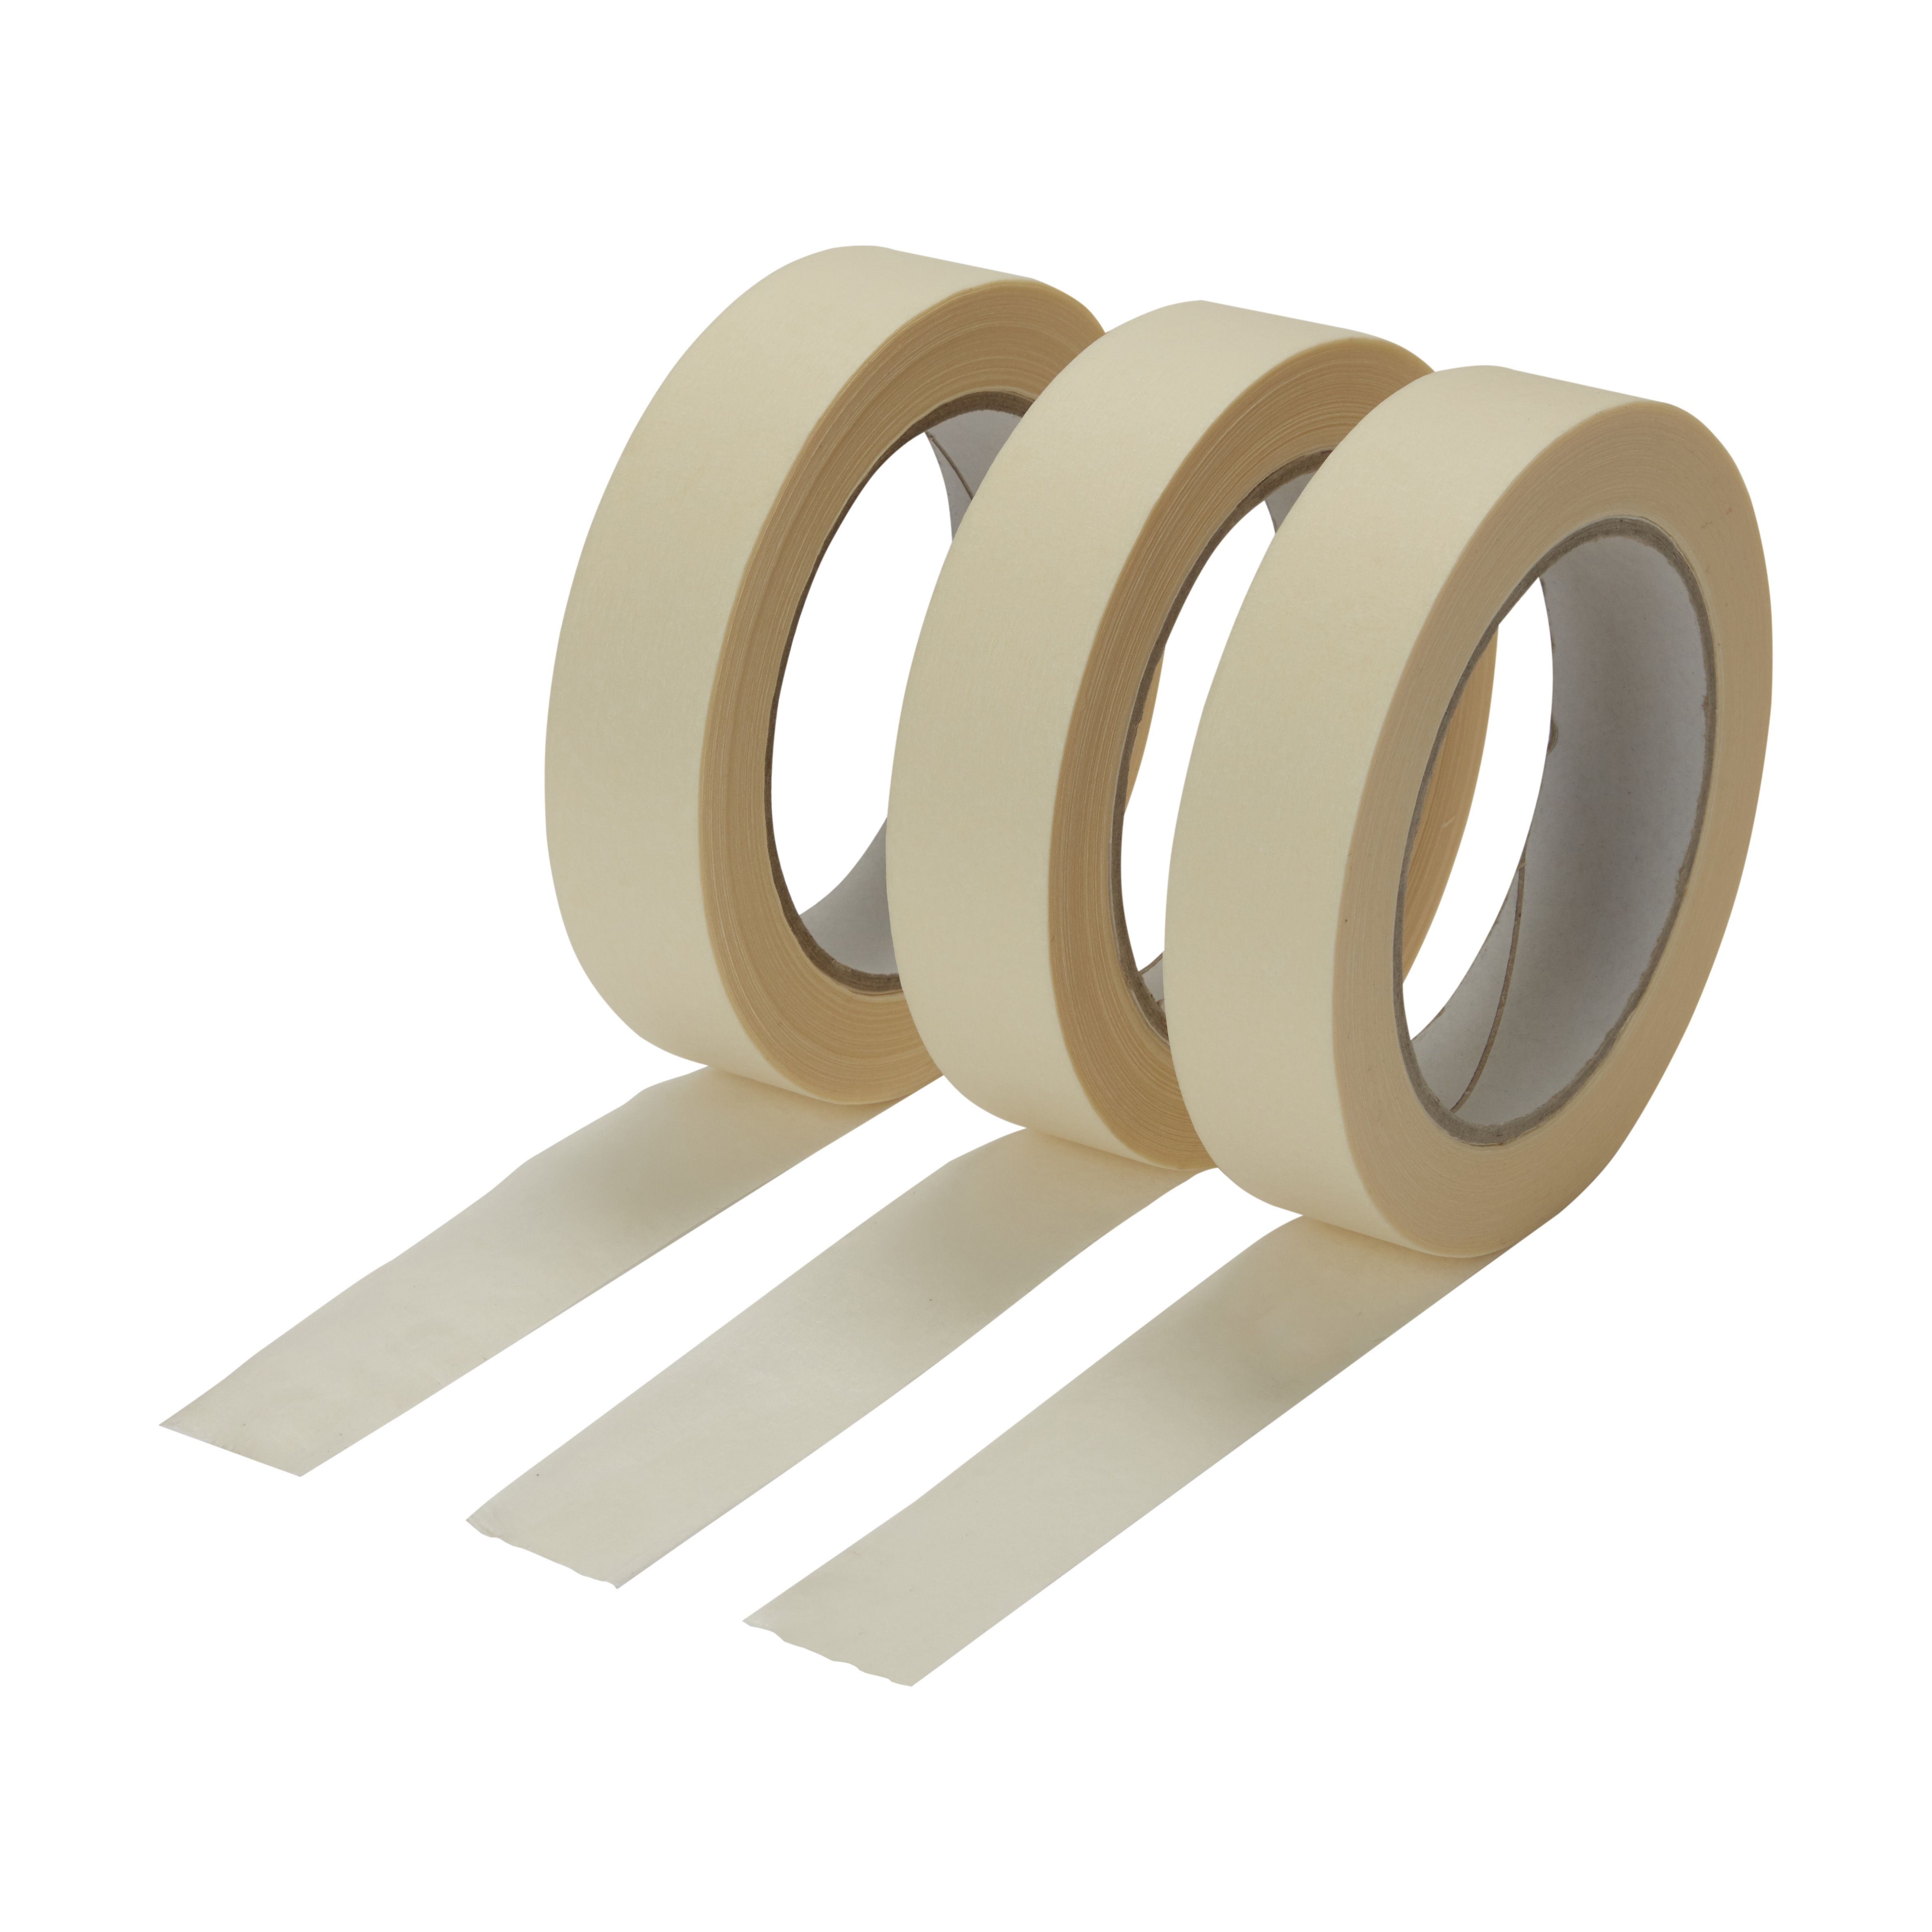 Wide Masking Tape, General Purpose Beige White Painters Tape for Home,  Office, L